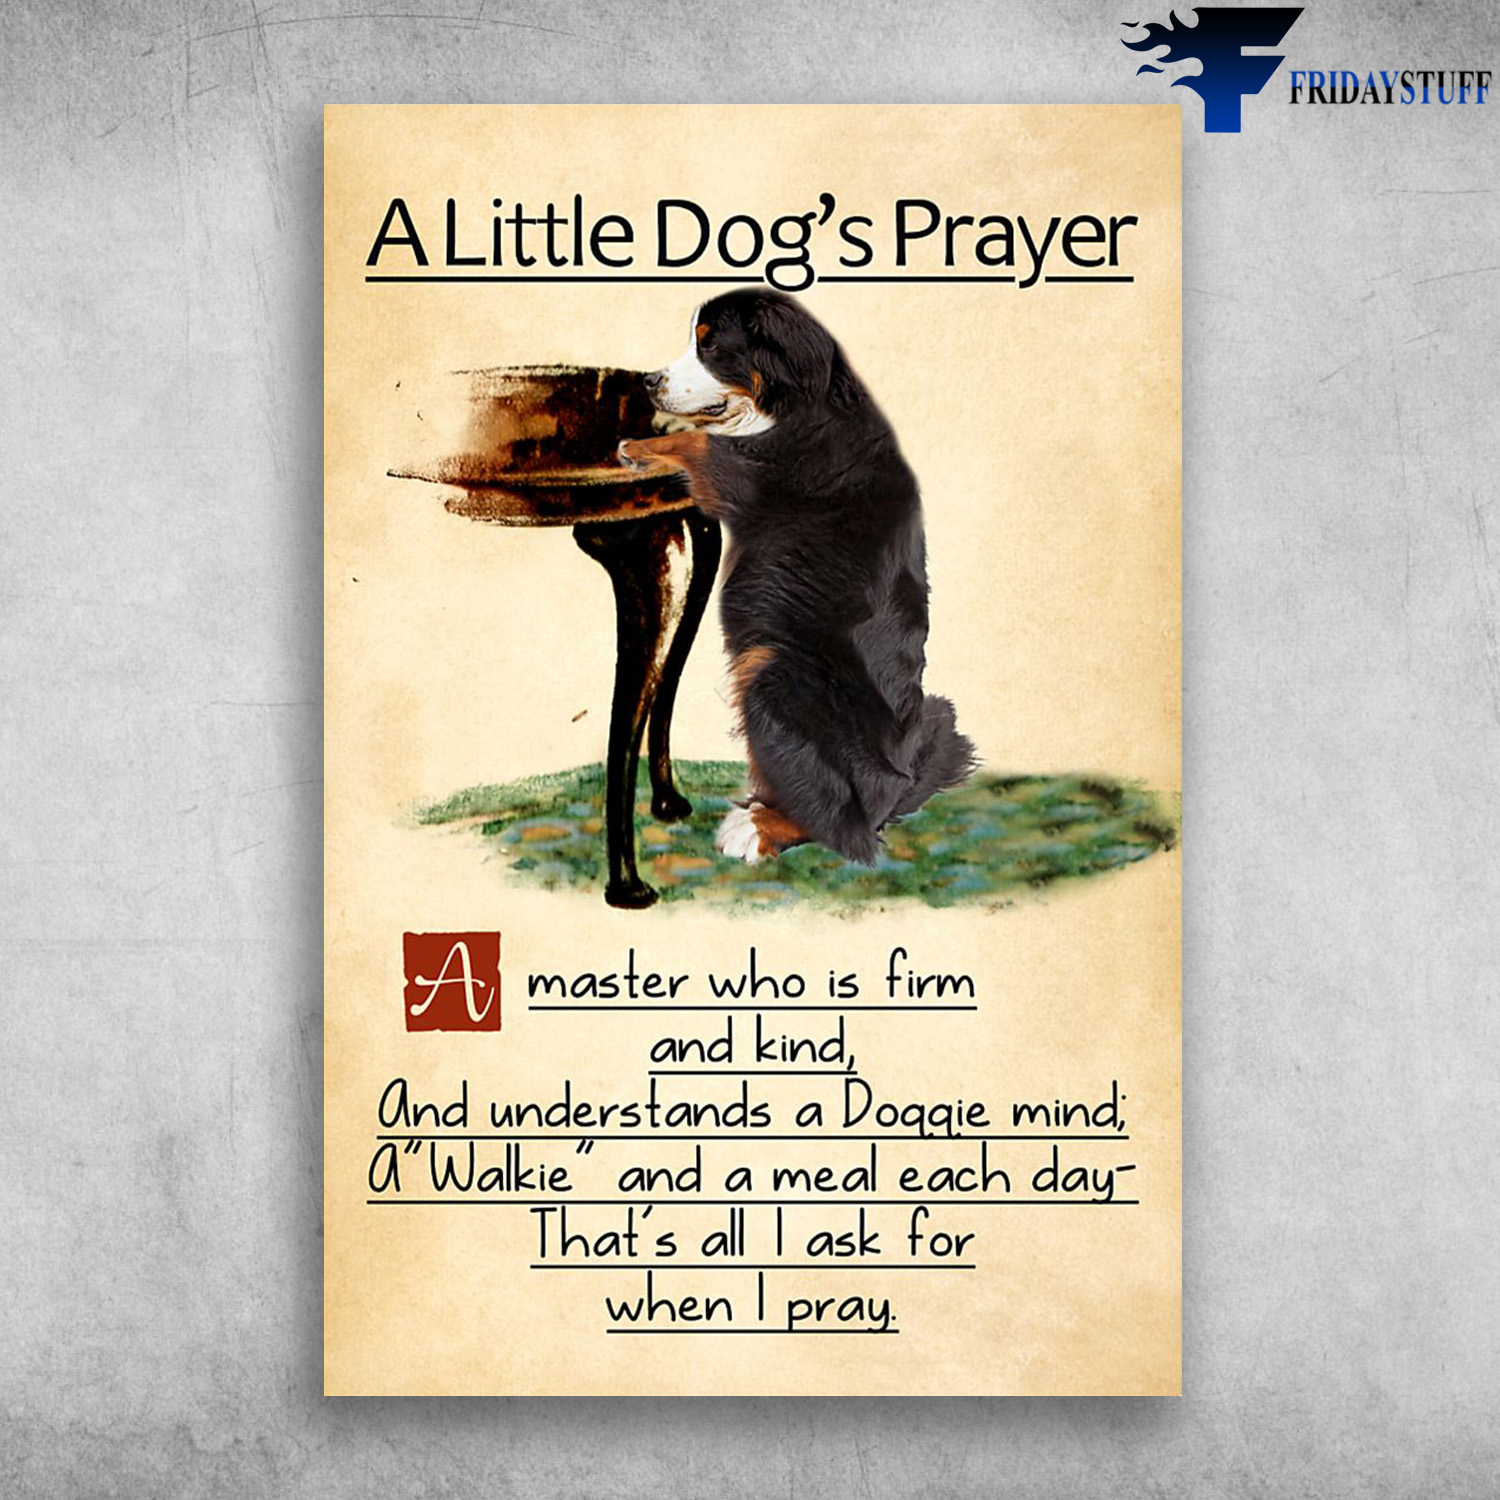 Bernese Mountain Dog - A Little Dog's Prayer, A Master Who Is Film And Kind, And Understands A Doggie Mind, A Walkie And A Meal Each Day, That's All I Ask For, When I Pray